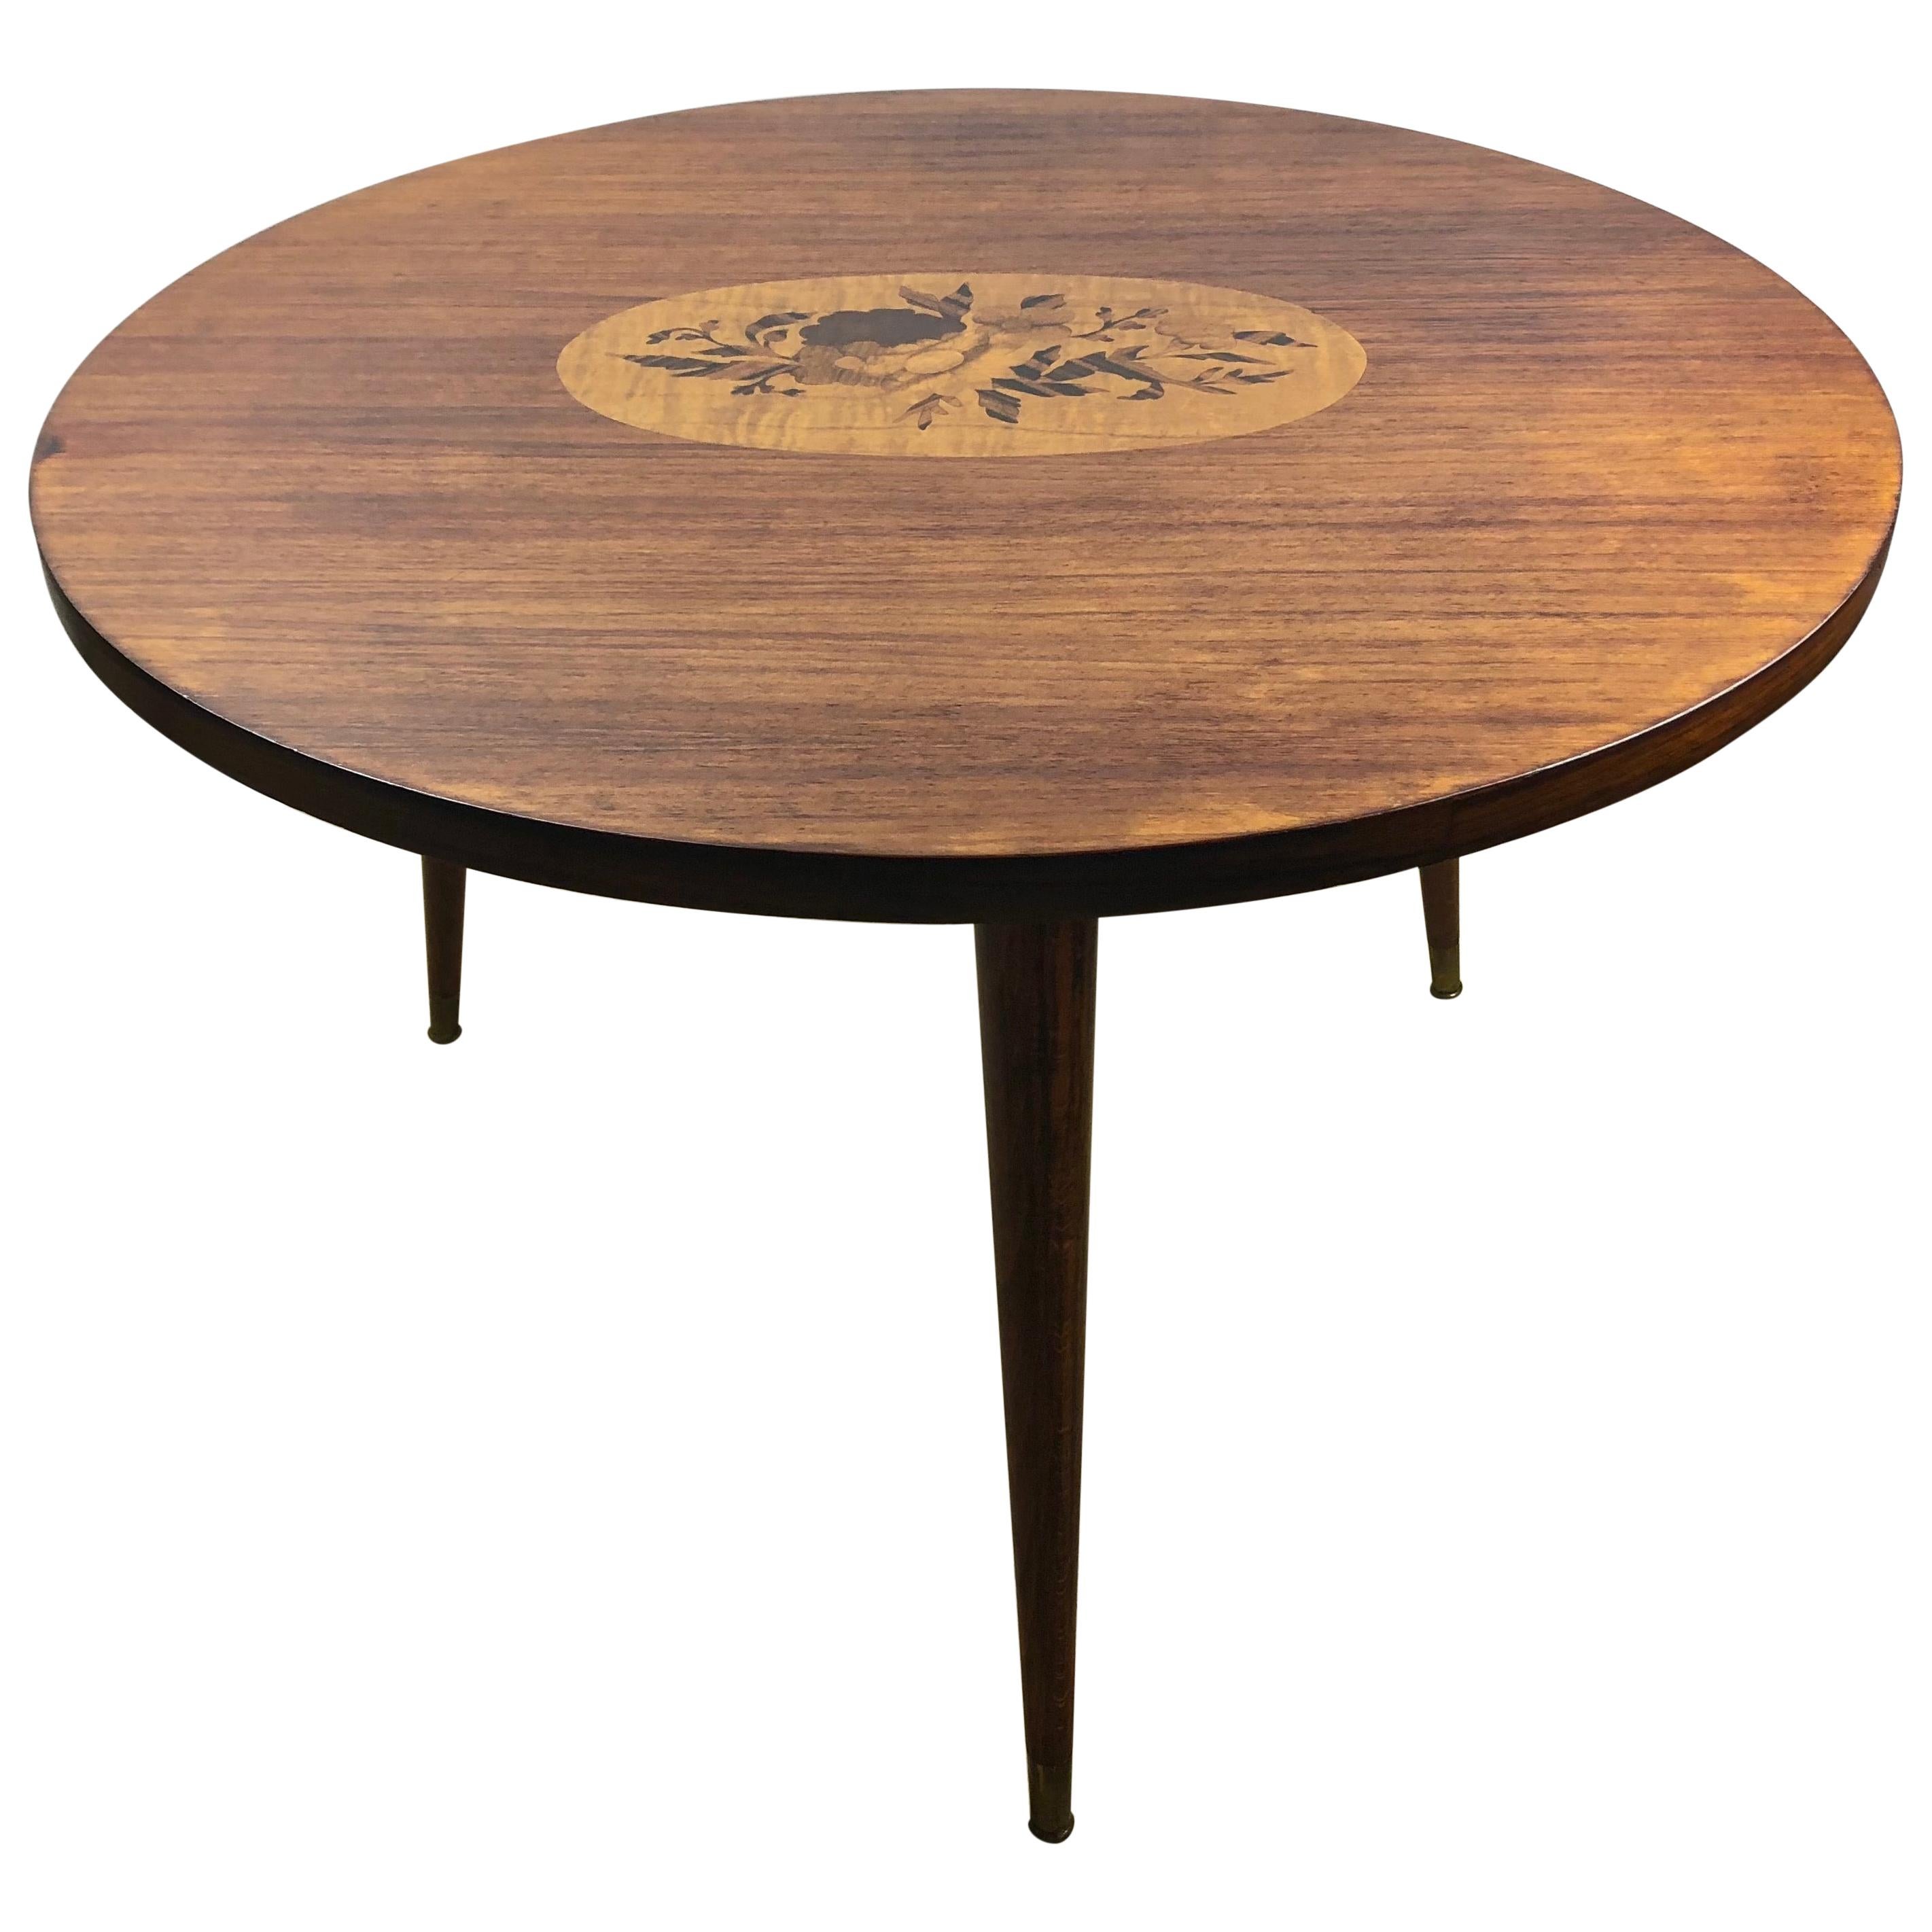 French Art Deco Style Round Wooden Cocktail or Side Table with Marquetry Center For Sale